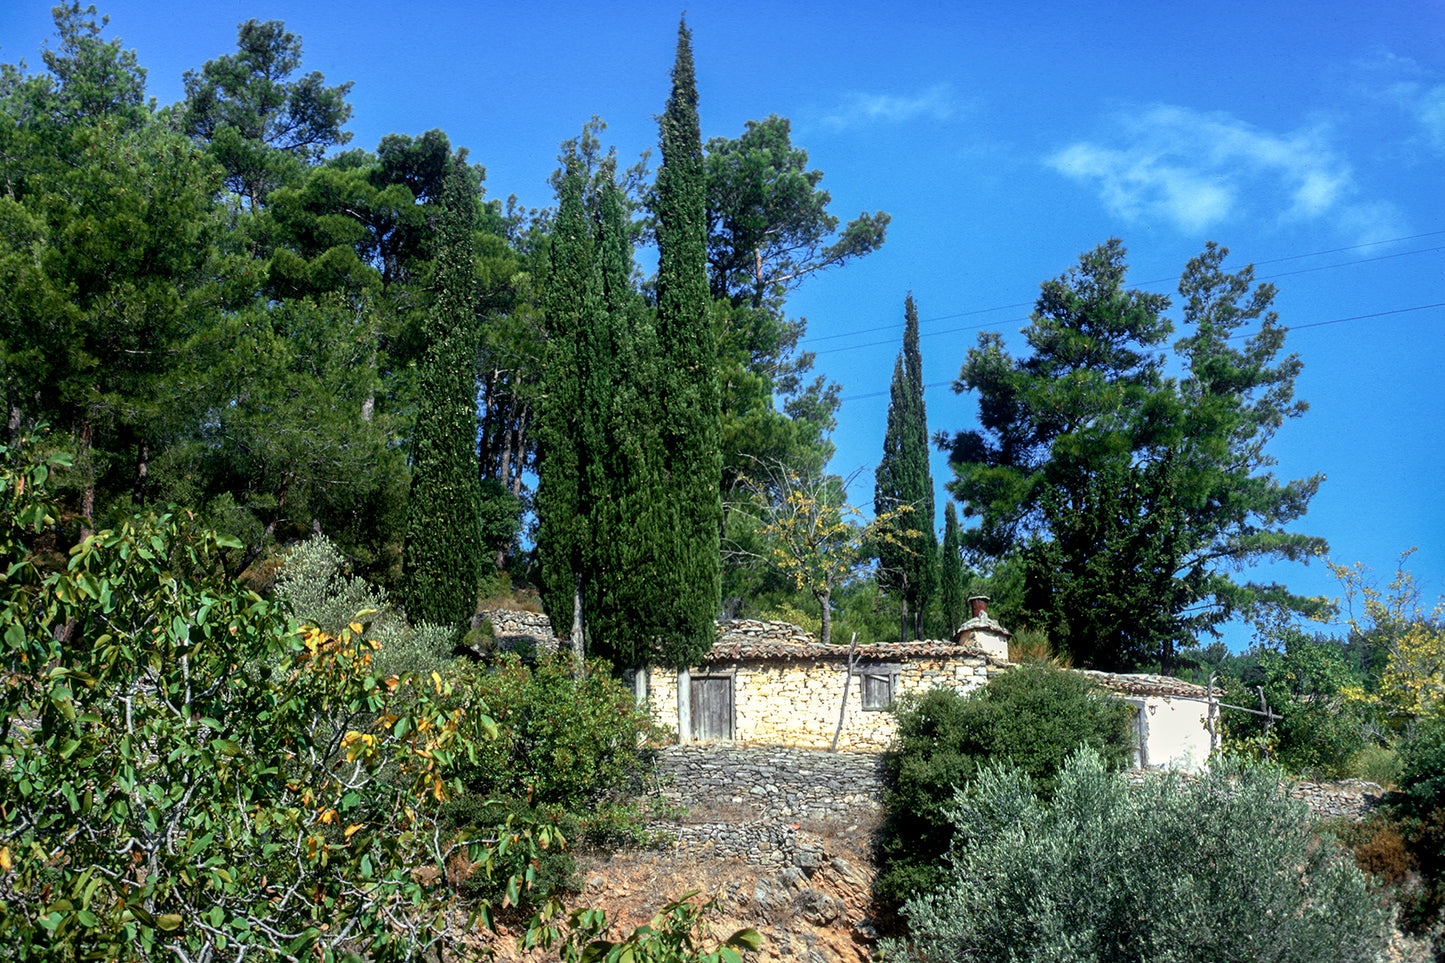 Samos: An old house in the middle of nowhere